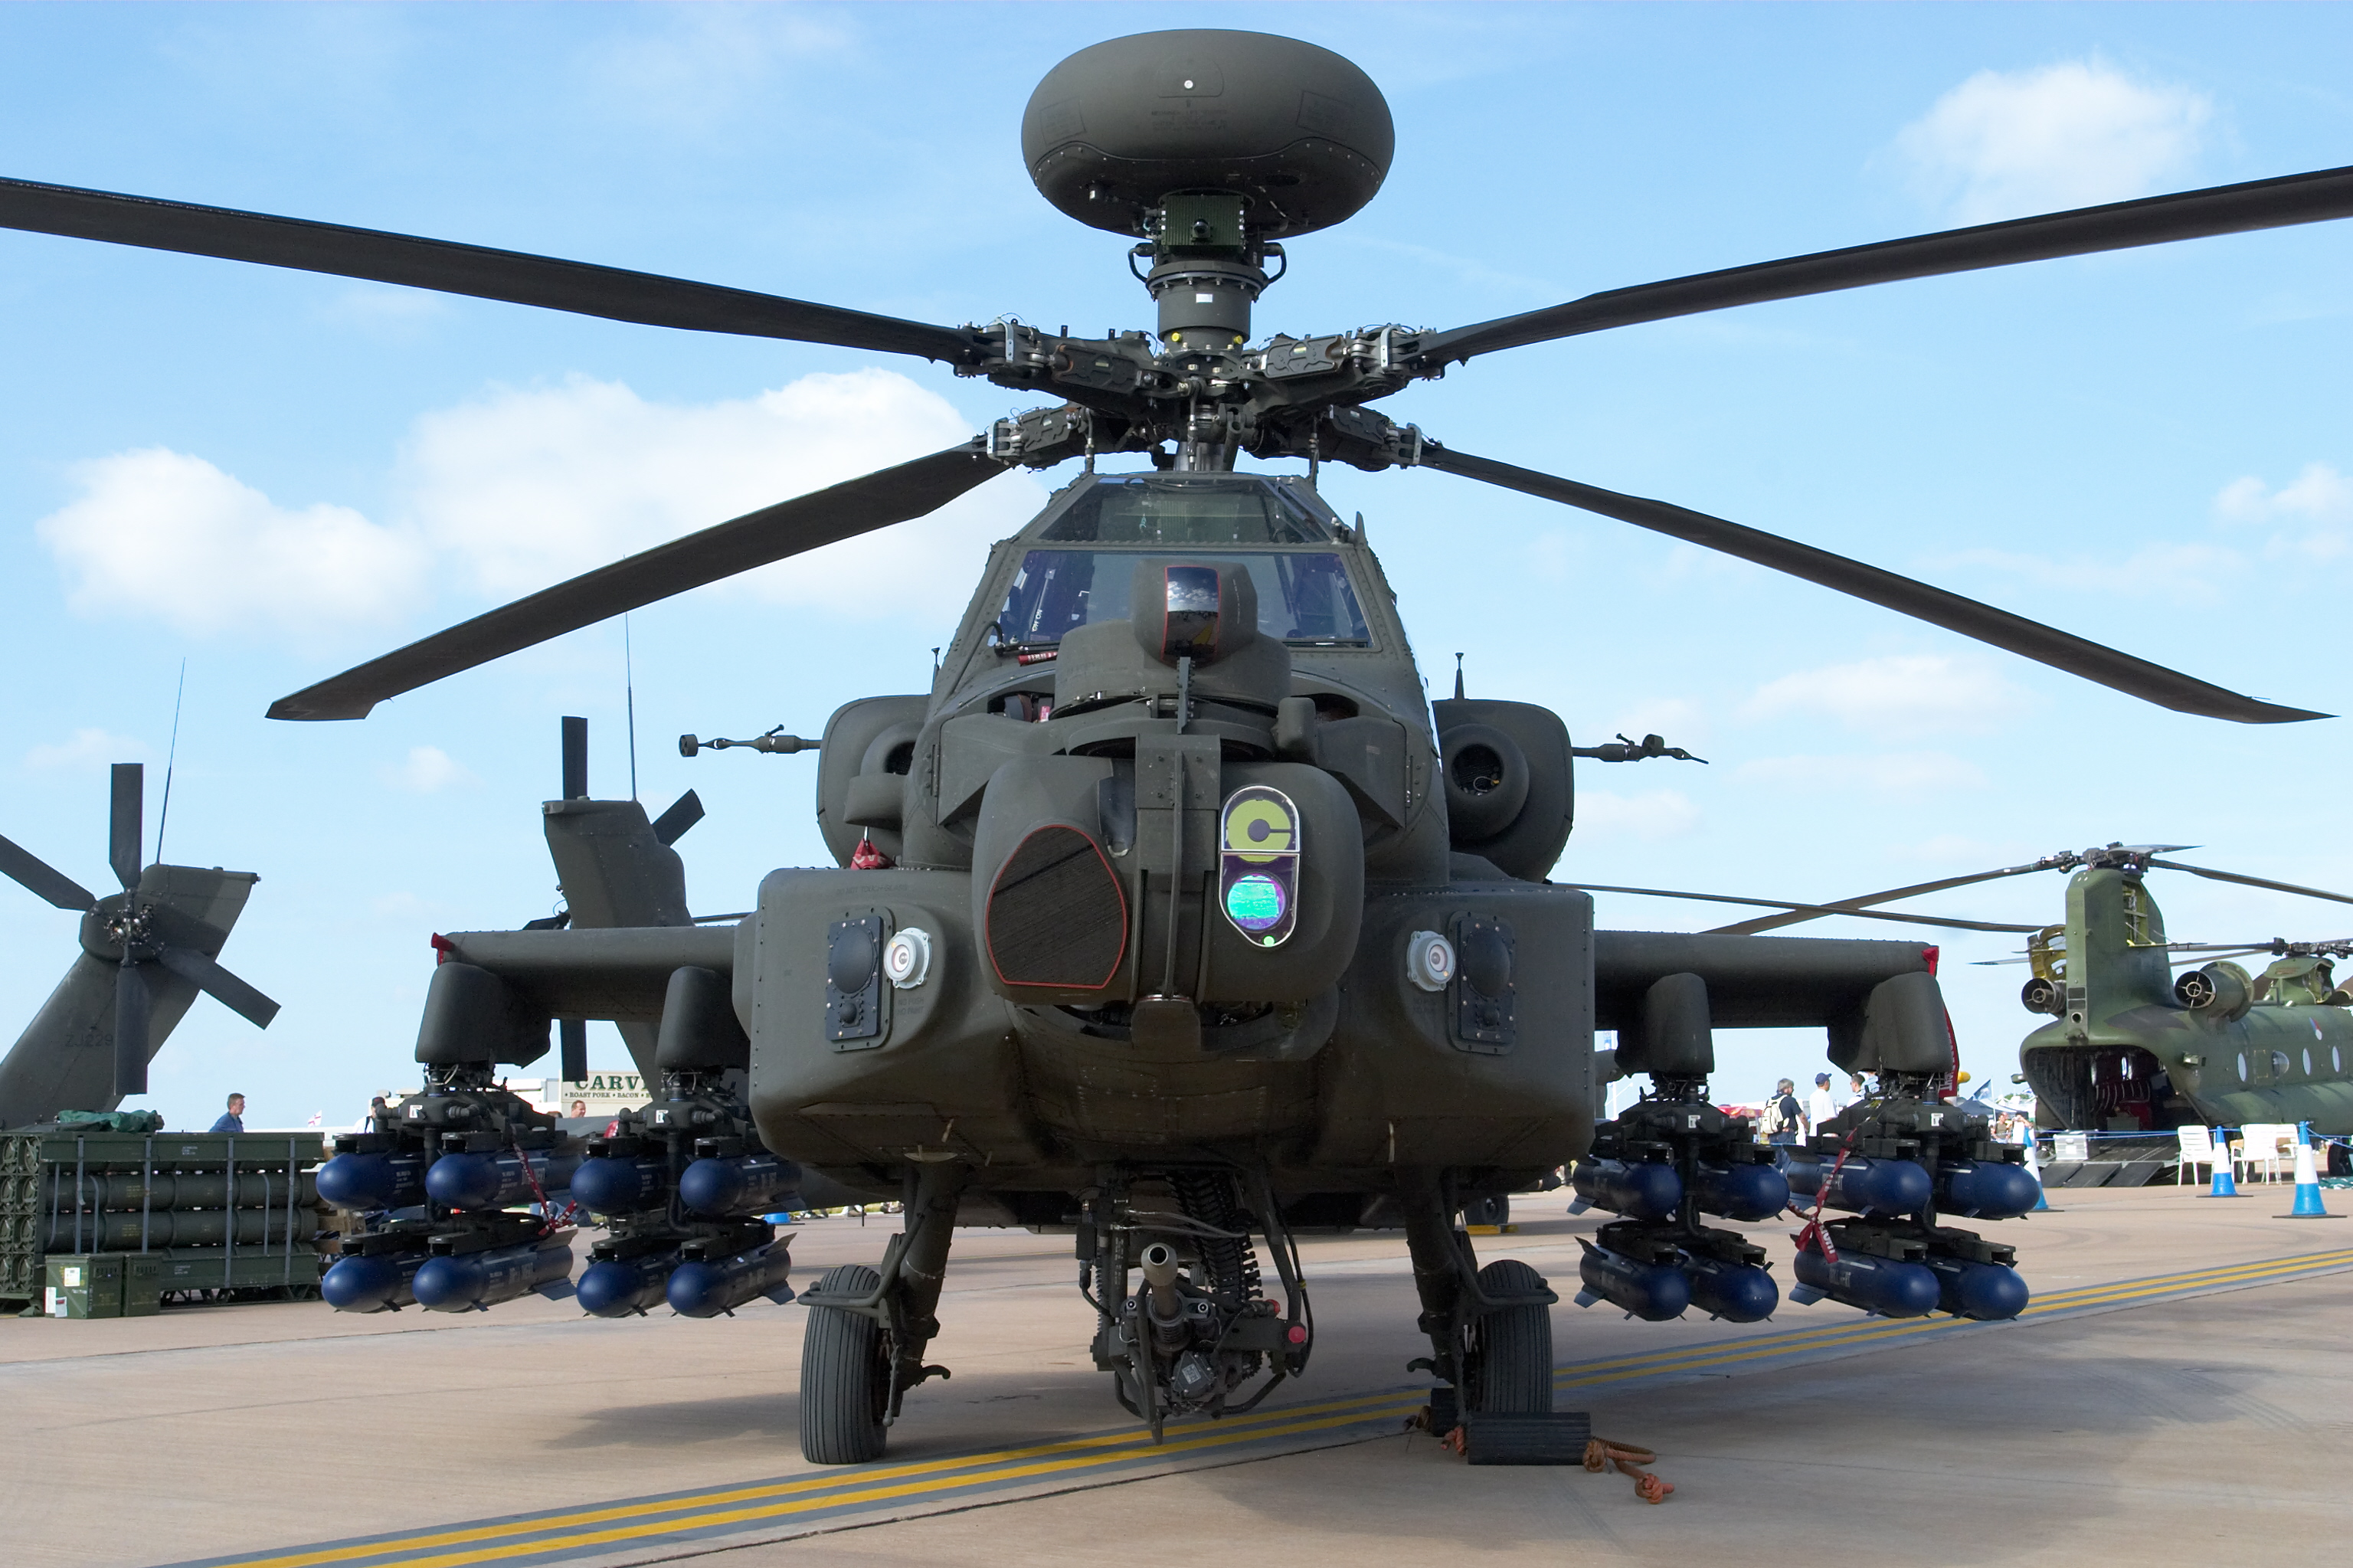 General 3072x2047 military helicopters aircraft Boeing AH-64 Apache military aircraft vehicle frontal view